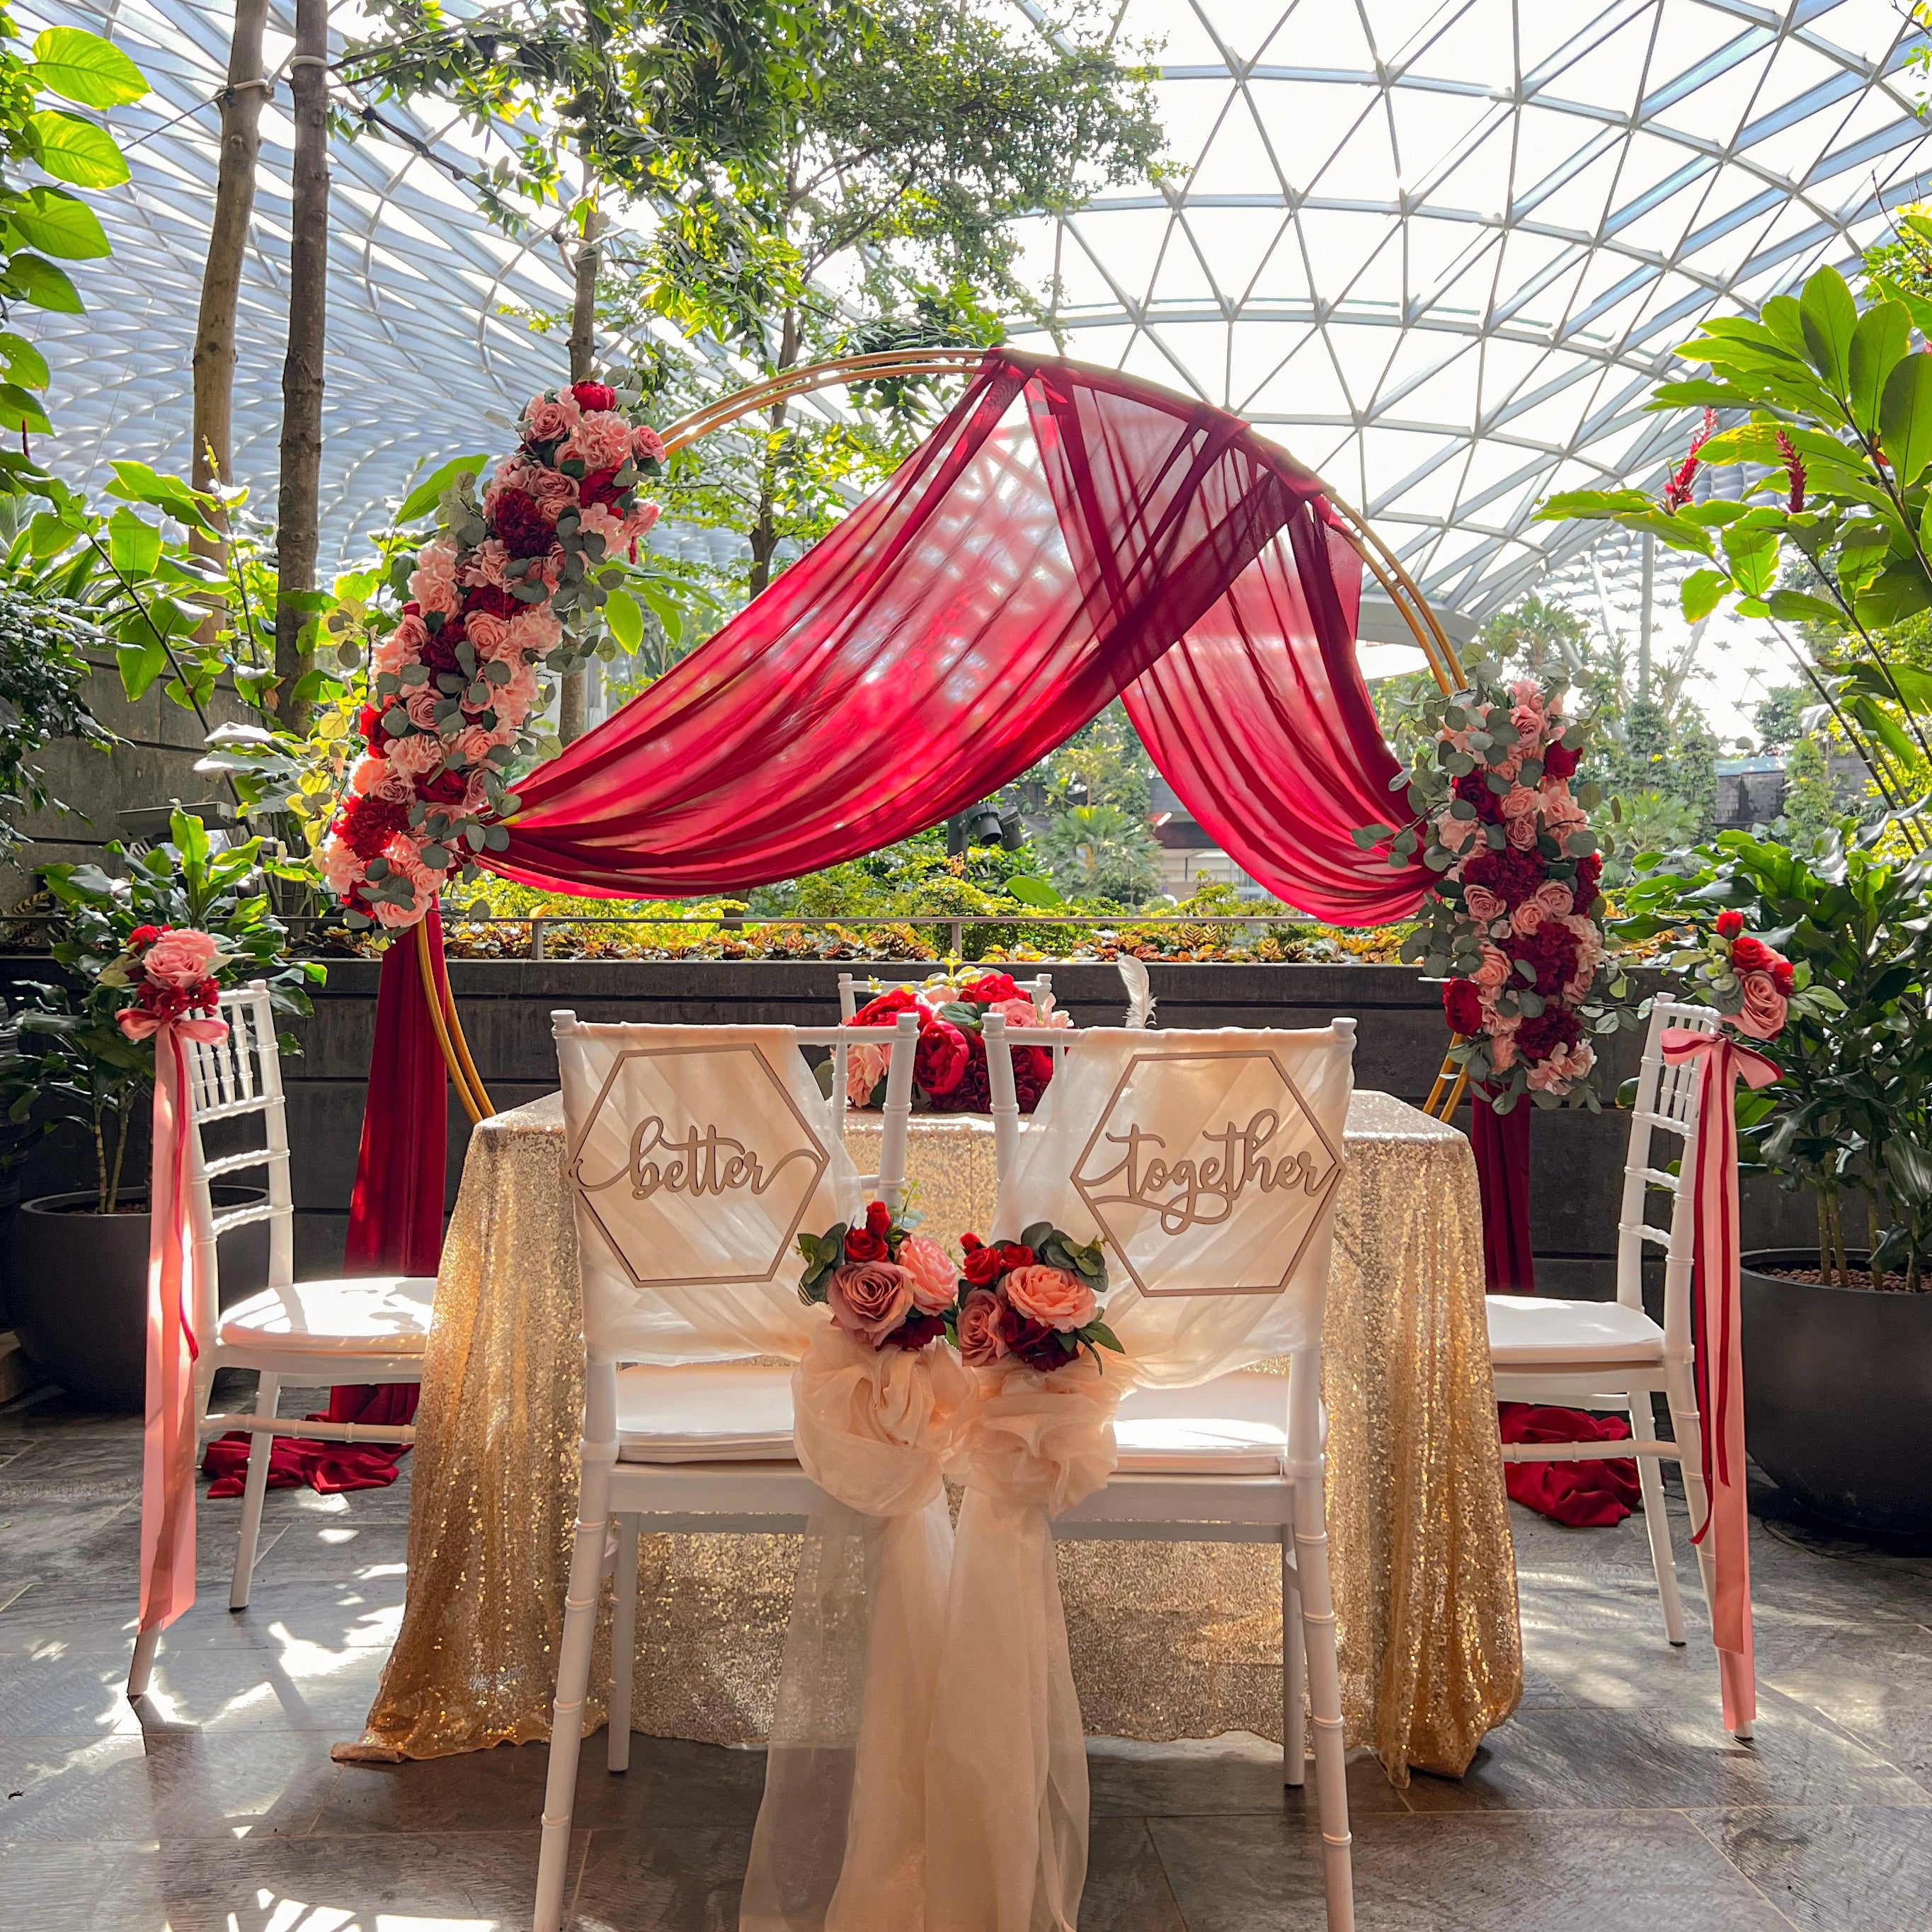 Sweet and Simple Outdoor Solemnisation/ROM Decor in Singapore - Pink Red Gold Theme with Round Arch, Jewel Changi SG